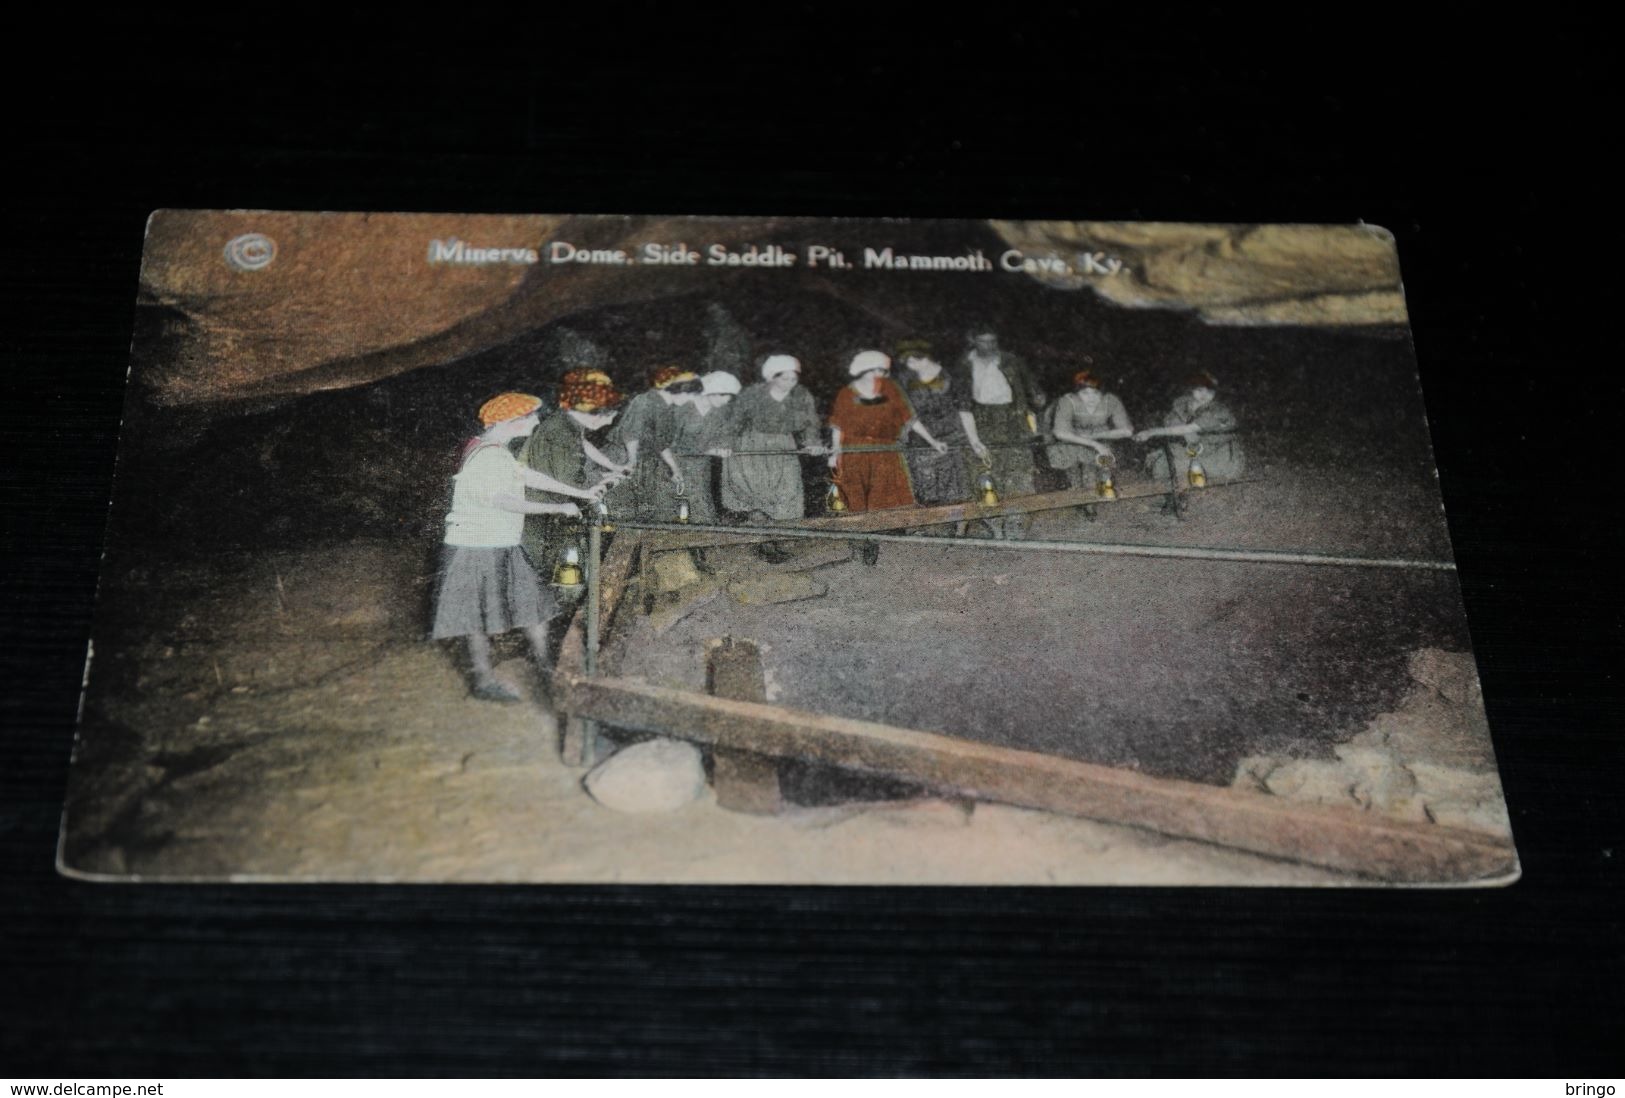 16064-          KENTUCKY, MAMMOTH CAVE, MINERVA DOME, SIDE SADDLE PIT - Mammoth Cave